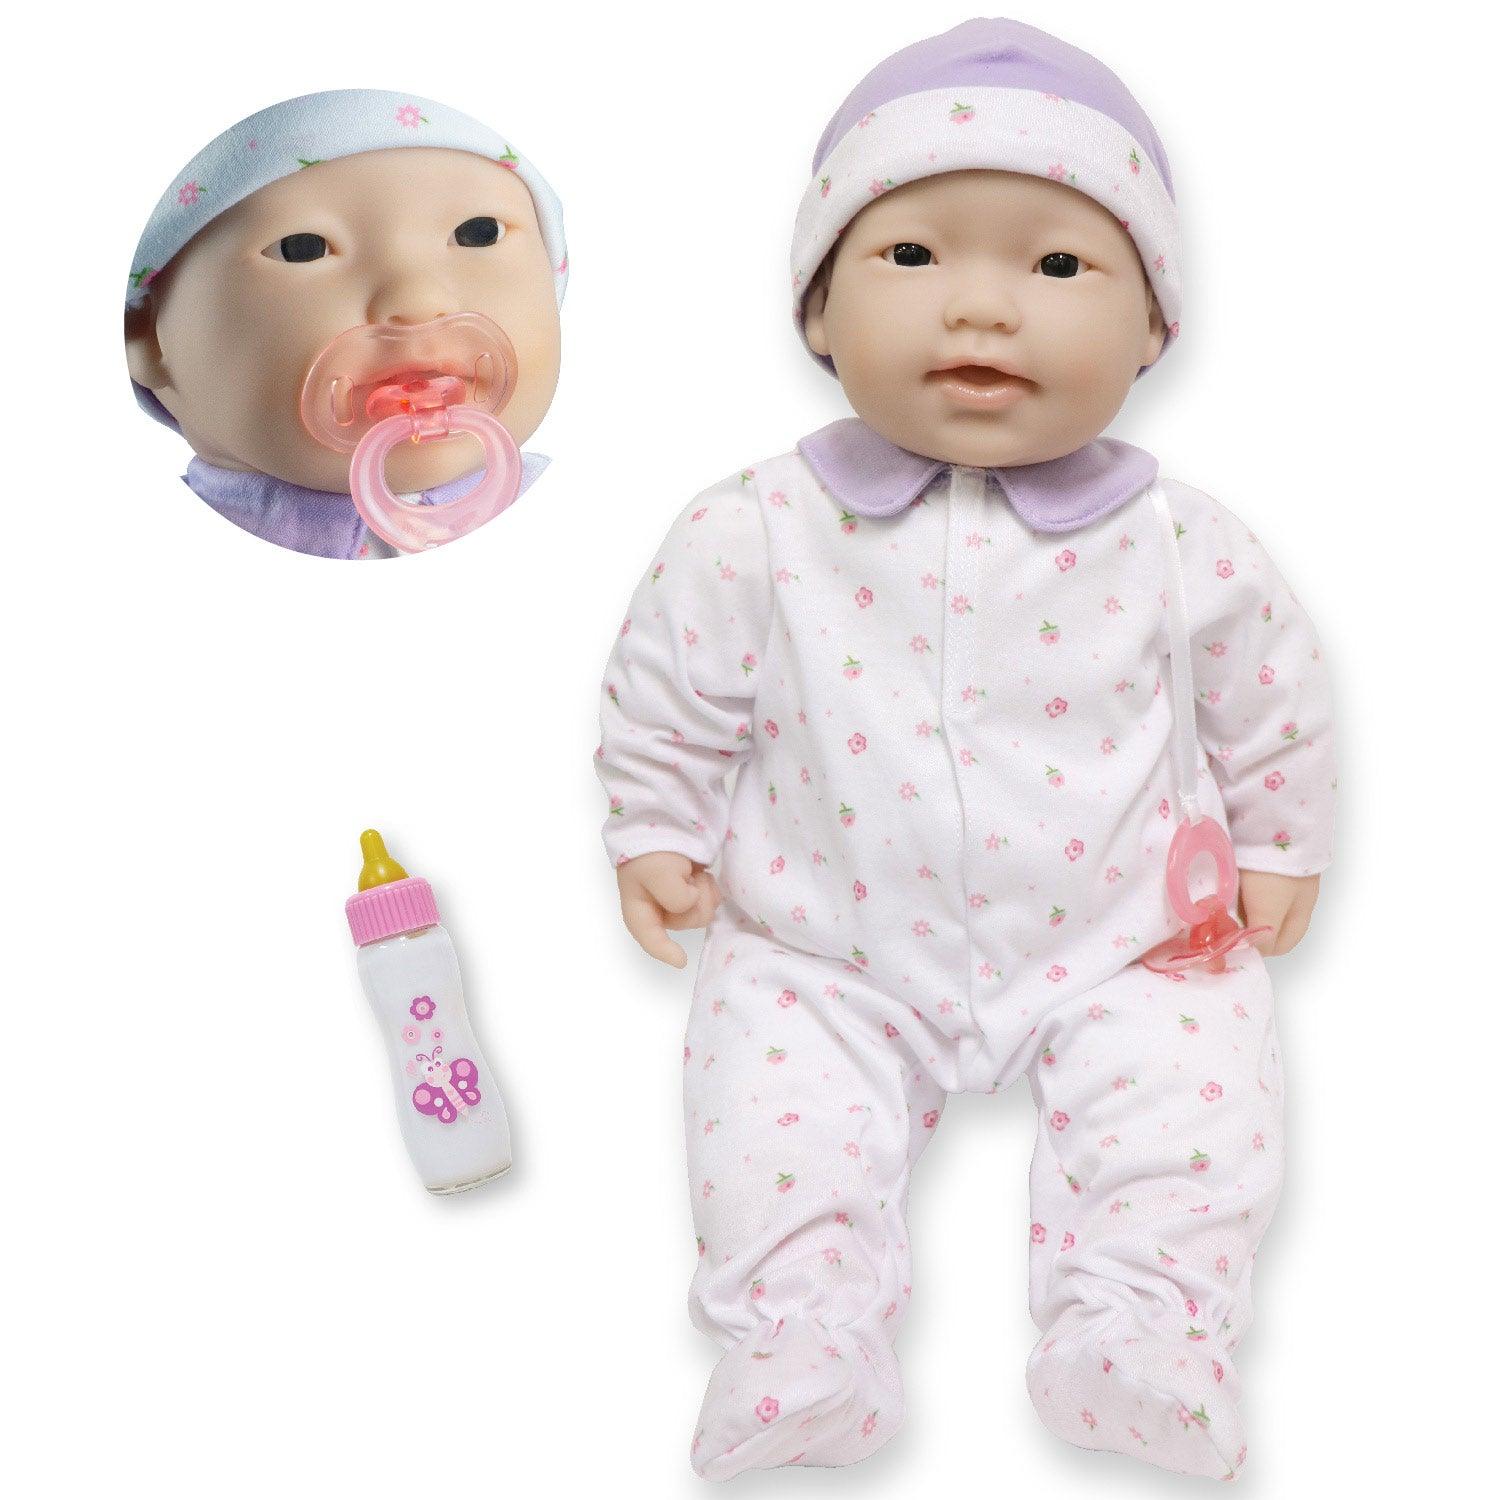 La Baby Play Doll - 20" Asian Soft Body Baby Doll in baby outfit Purple w/ Pacifier - JC Toys Group Inc.